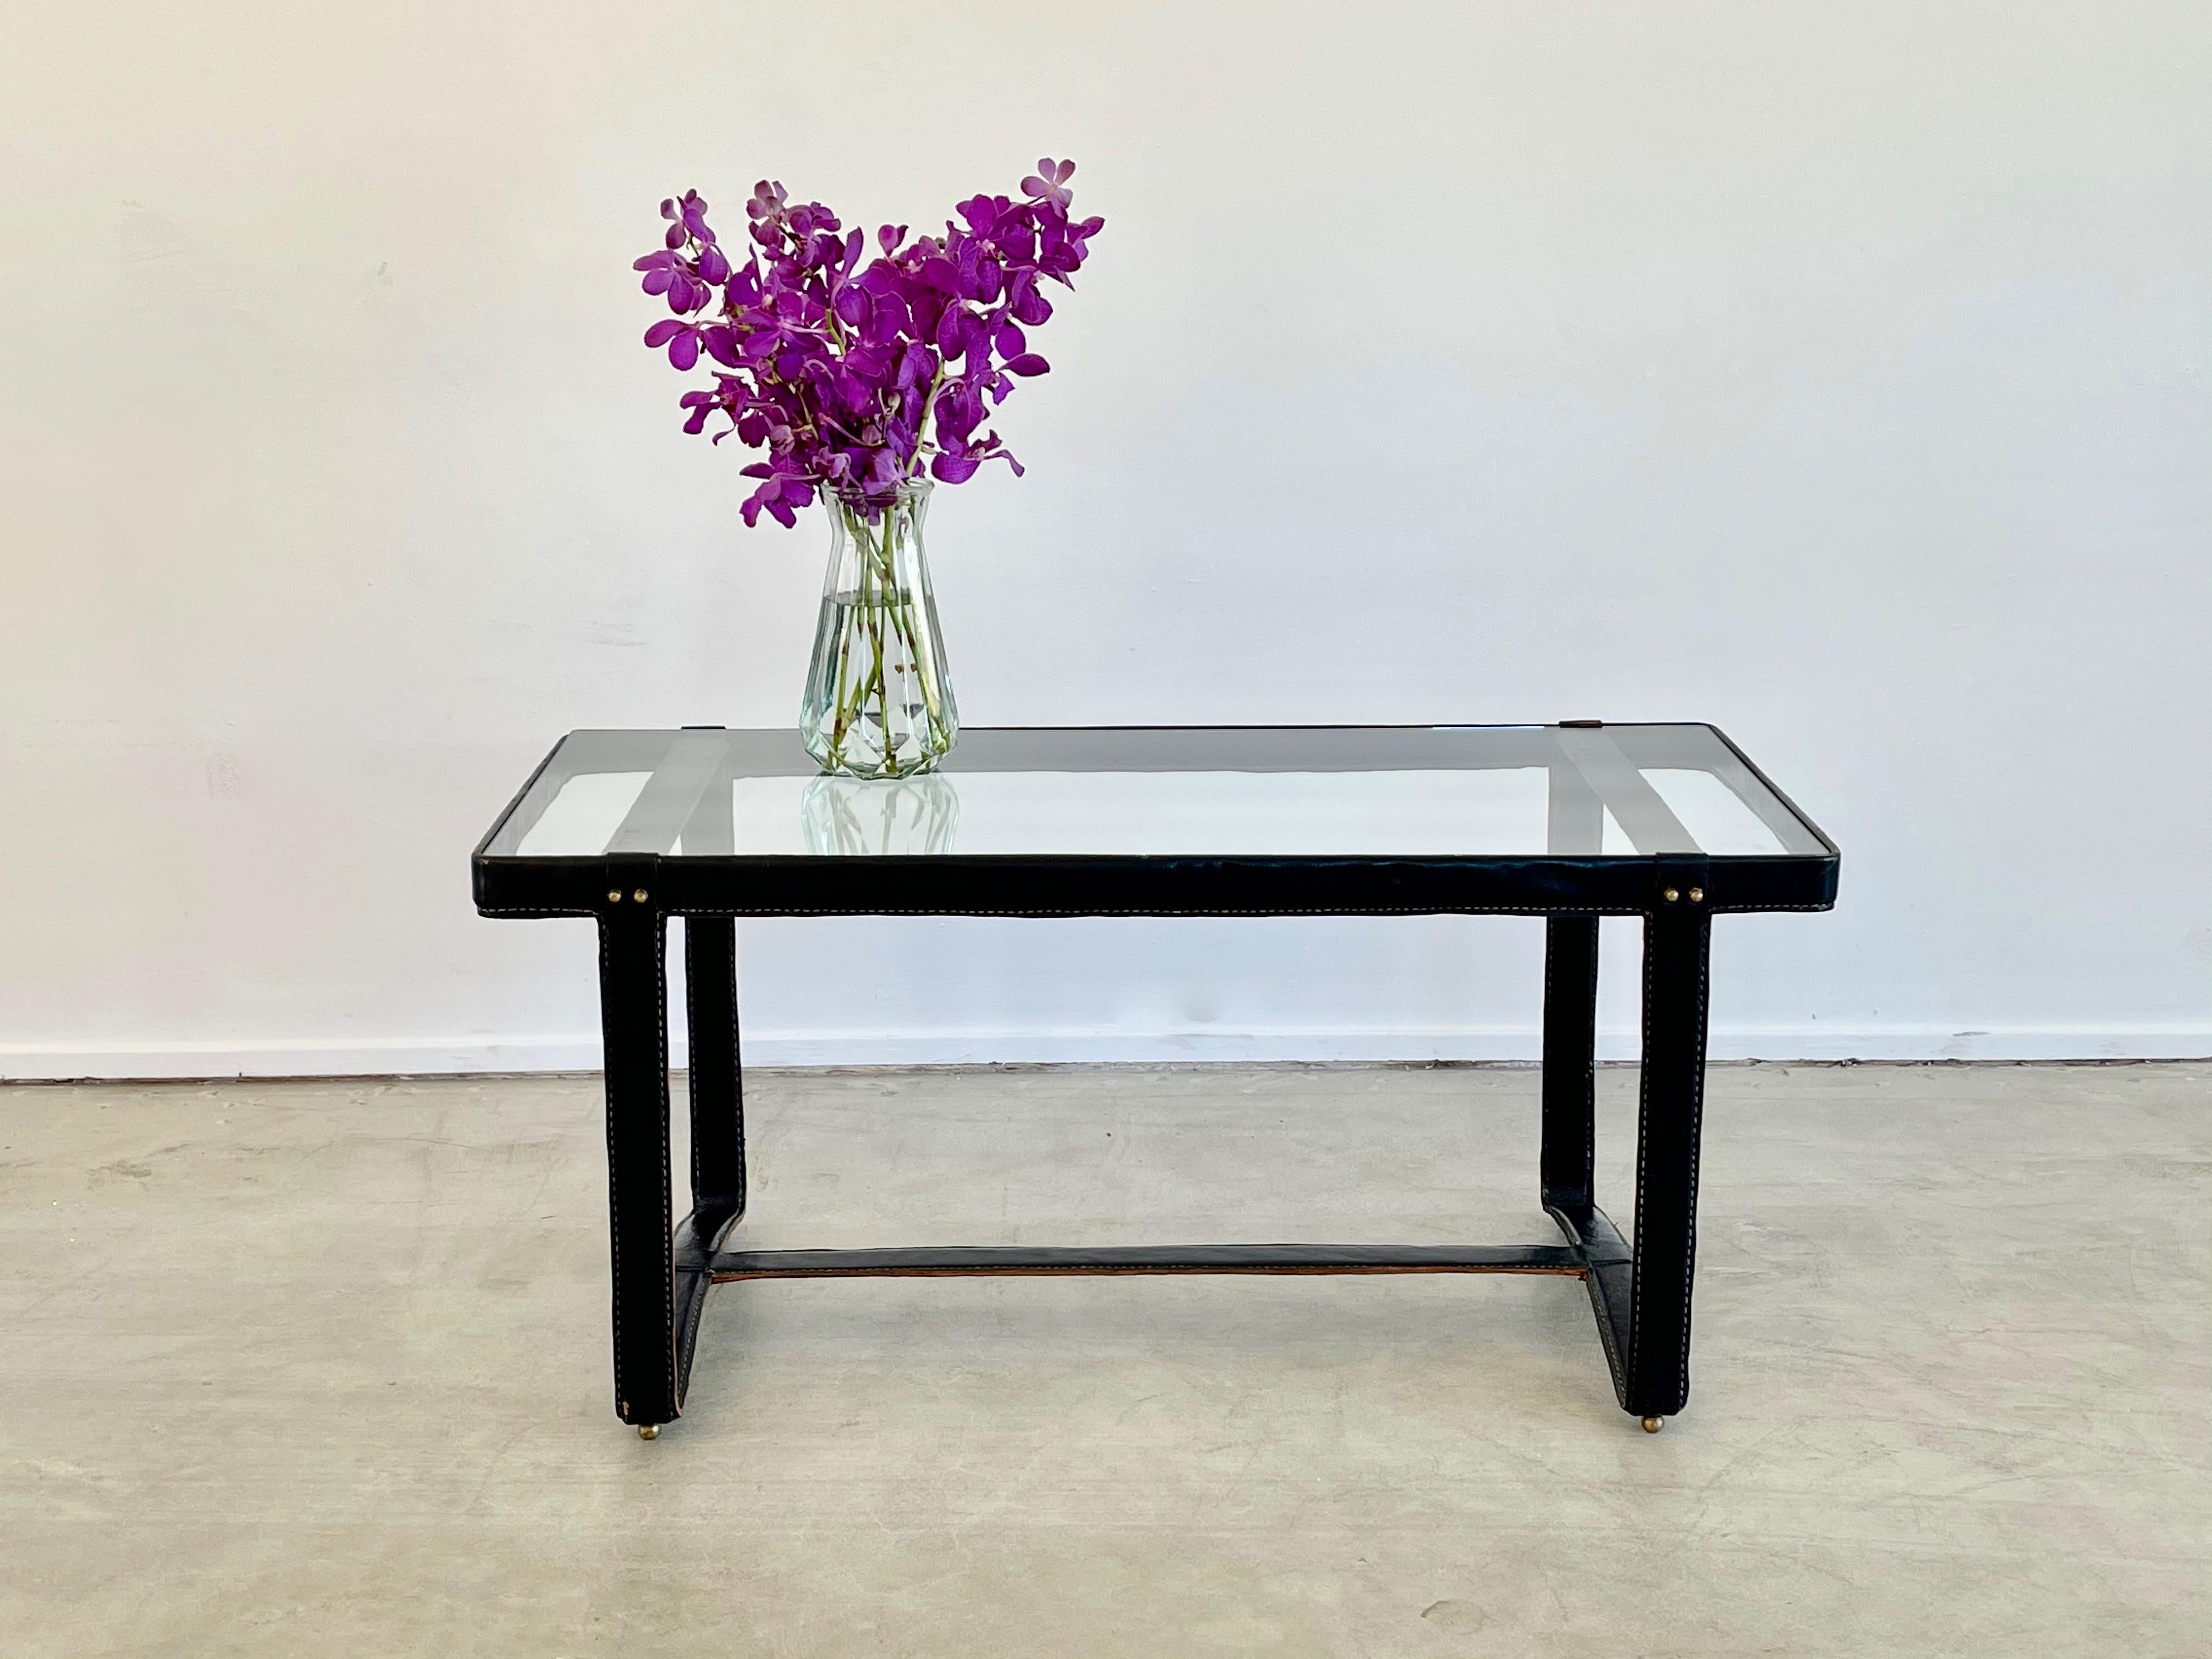 Jacques Adnet rectangular coffee table with signature leather stitching, curved base and brass detailing
New glass top.